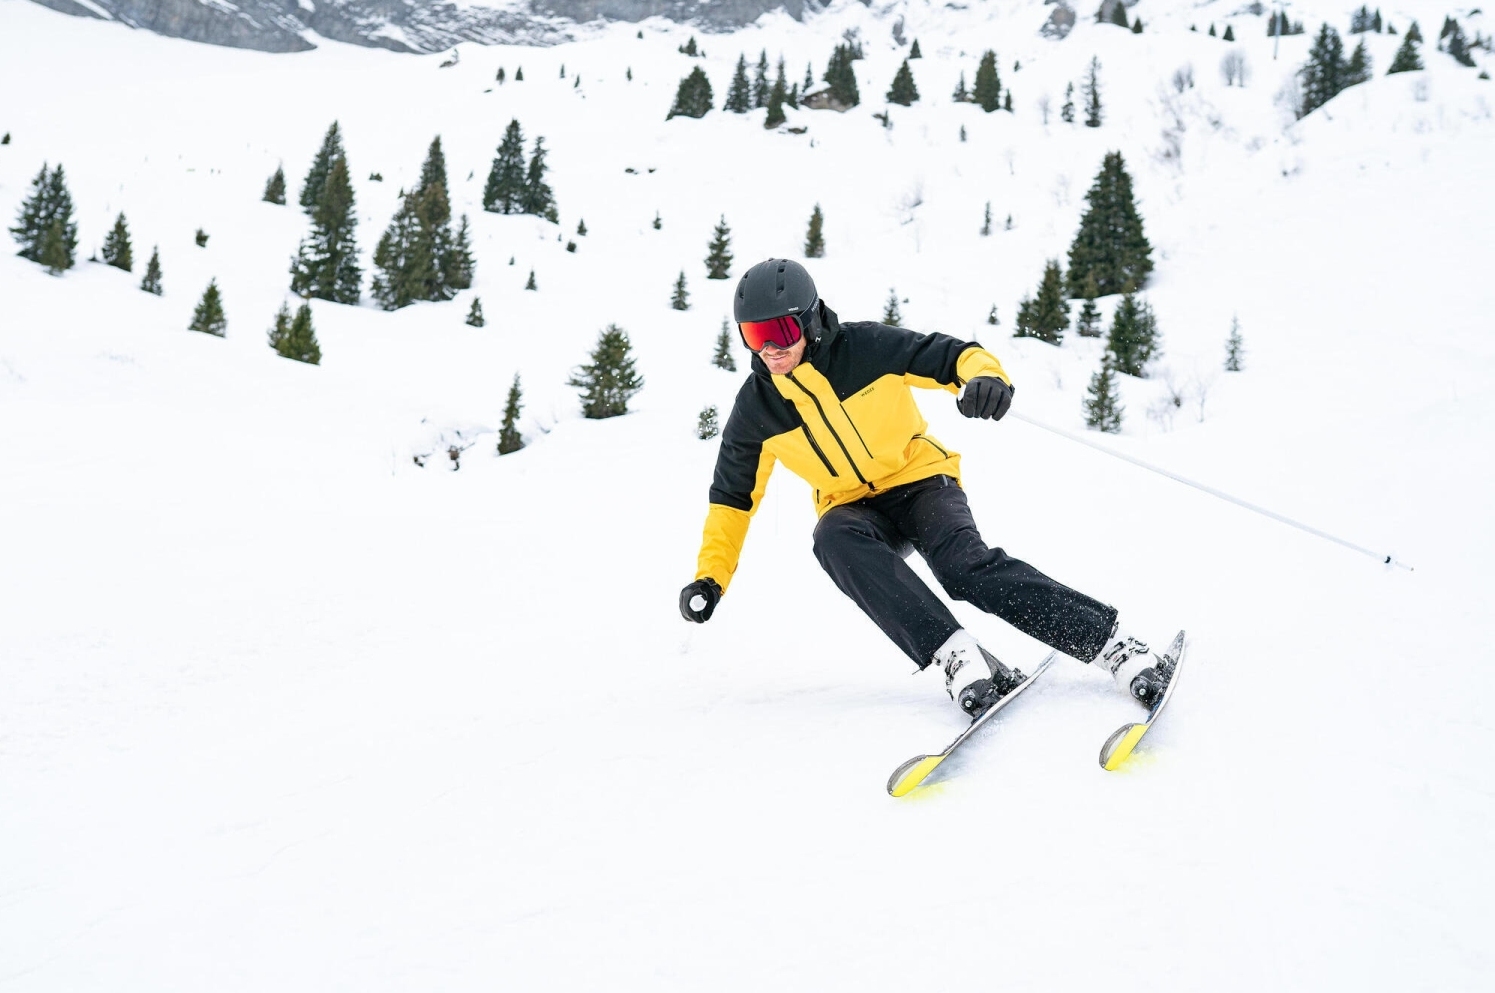 Decathlon Wedze 500 Sport Ski Jacket Review: Top Warmth and Build Quality  for On-Piste Fun review - Snow Magazine